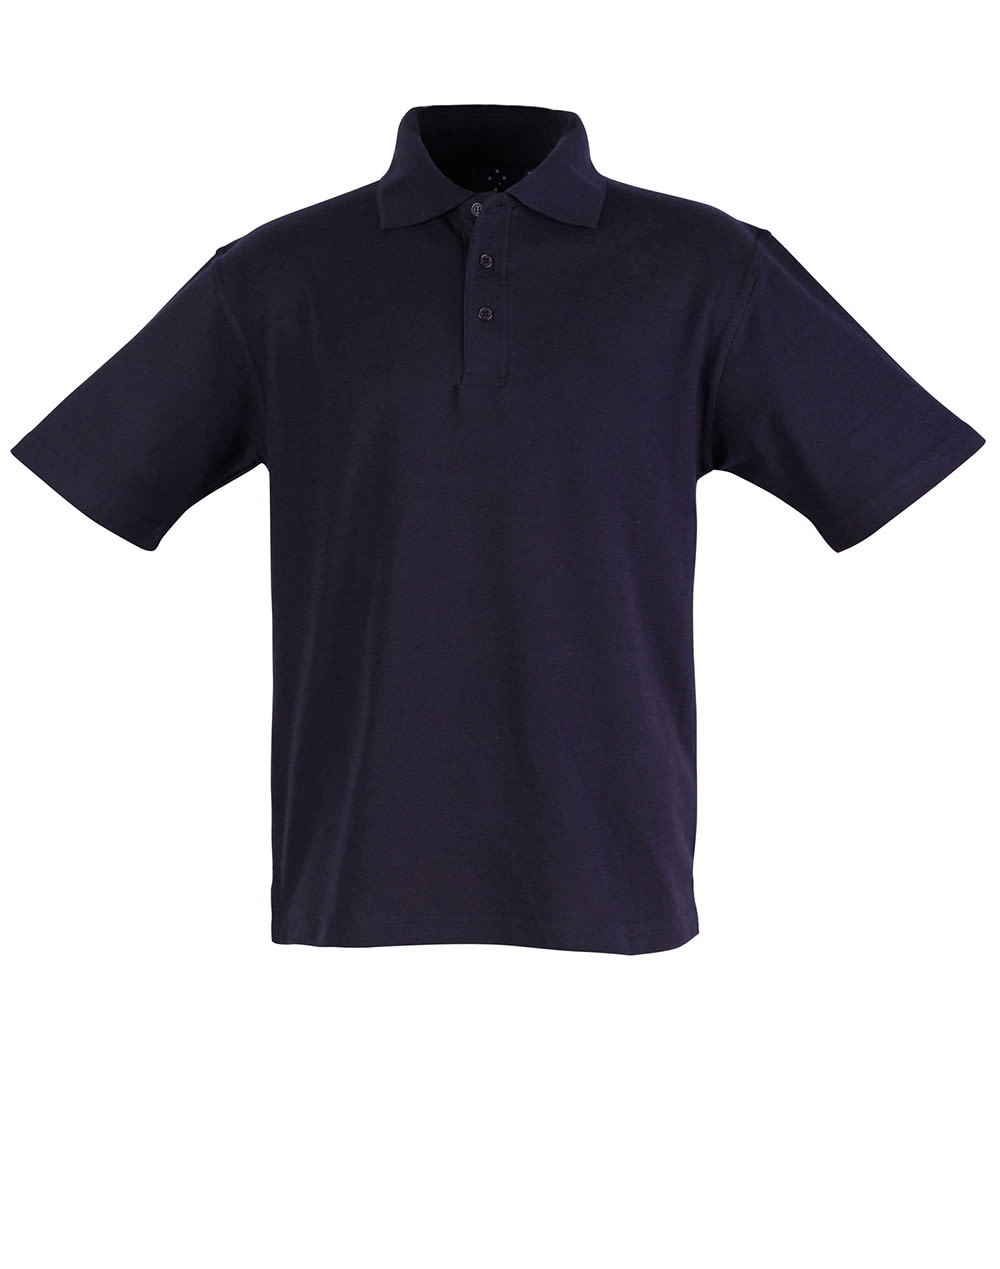 Kids Poly/Cotton Pique Knit Short Sleeve Polo (Unisex) PS11K | Navy